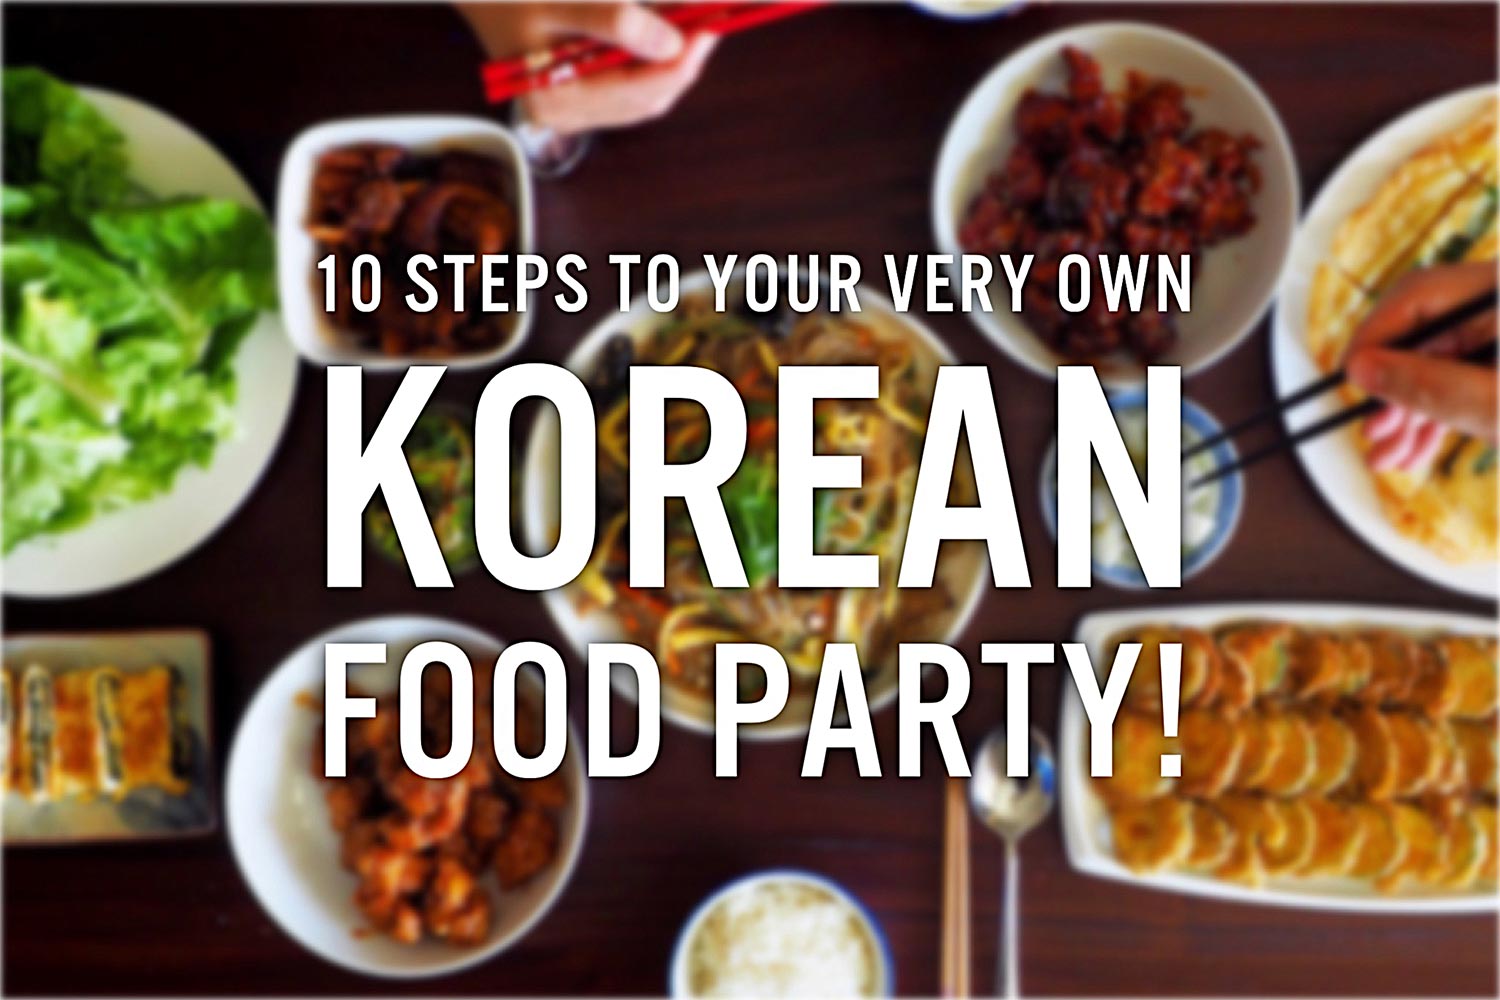 10 Steps to your very own Korean Food Party!